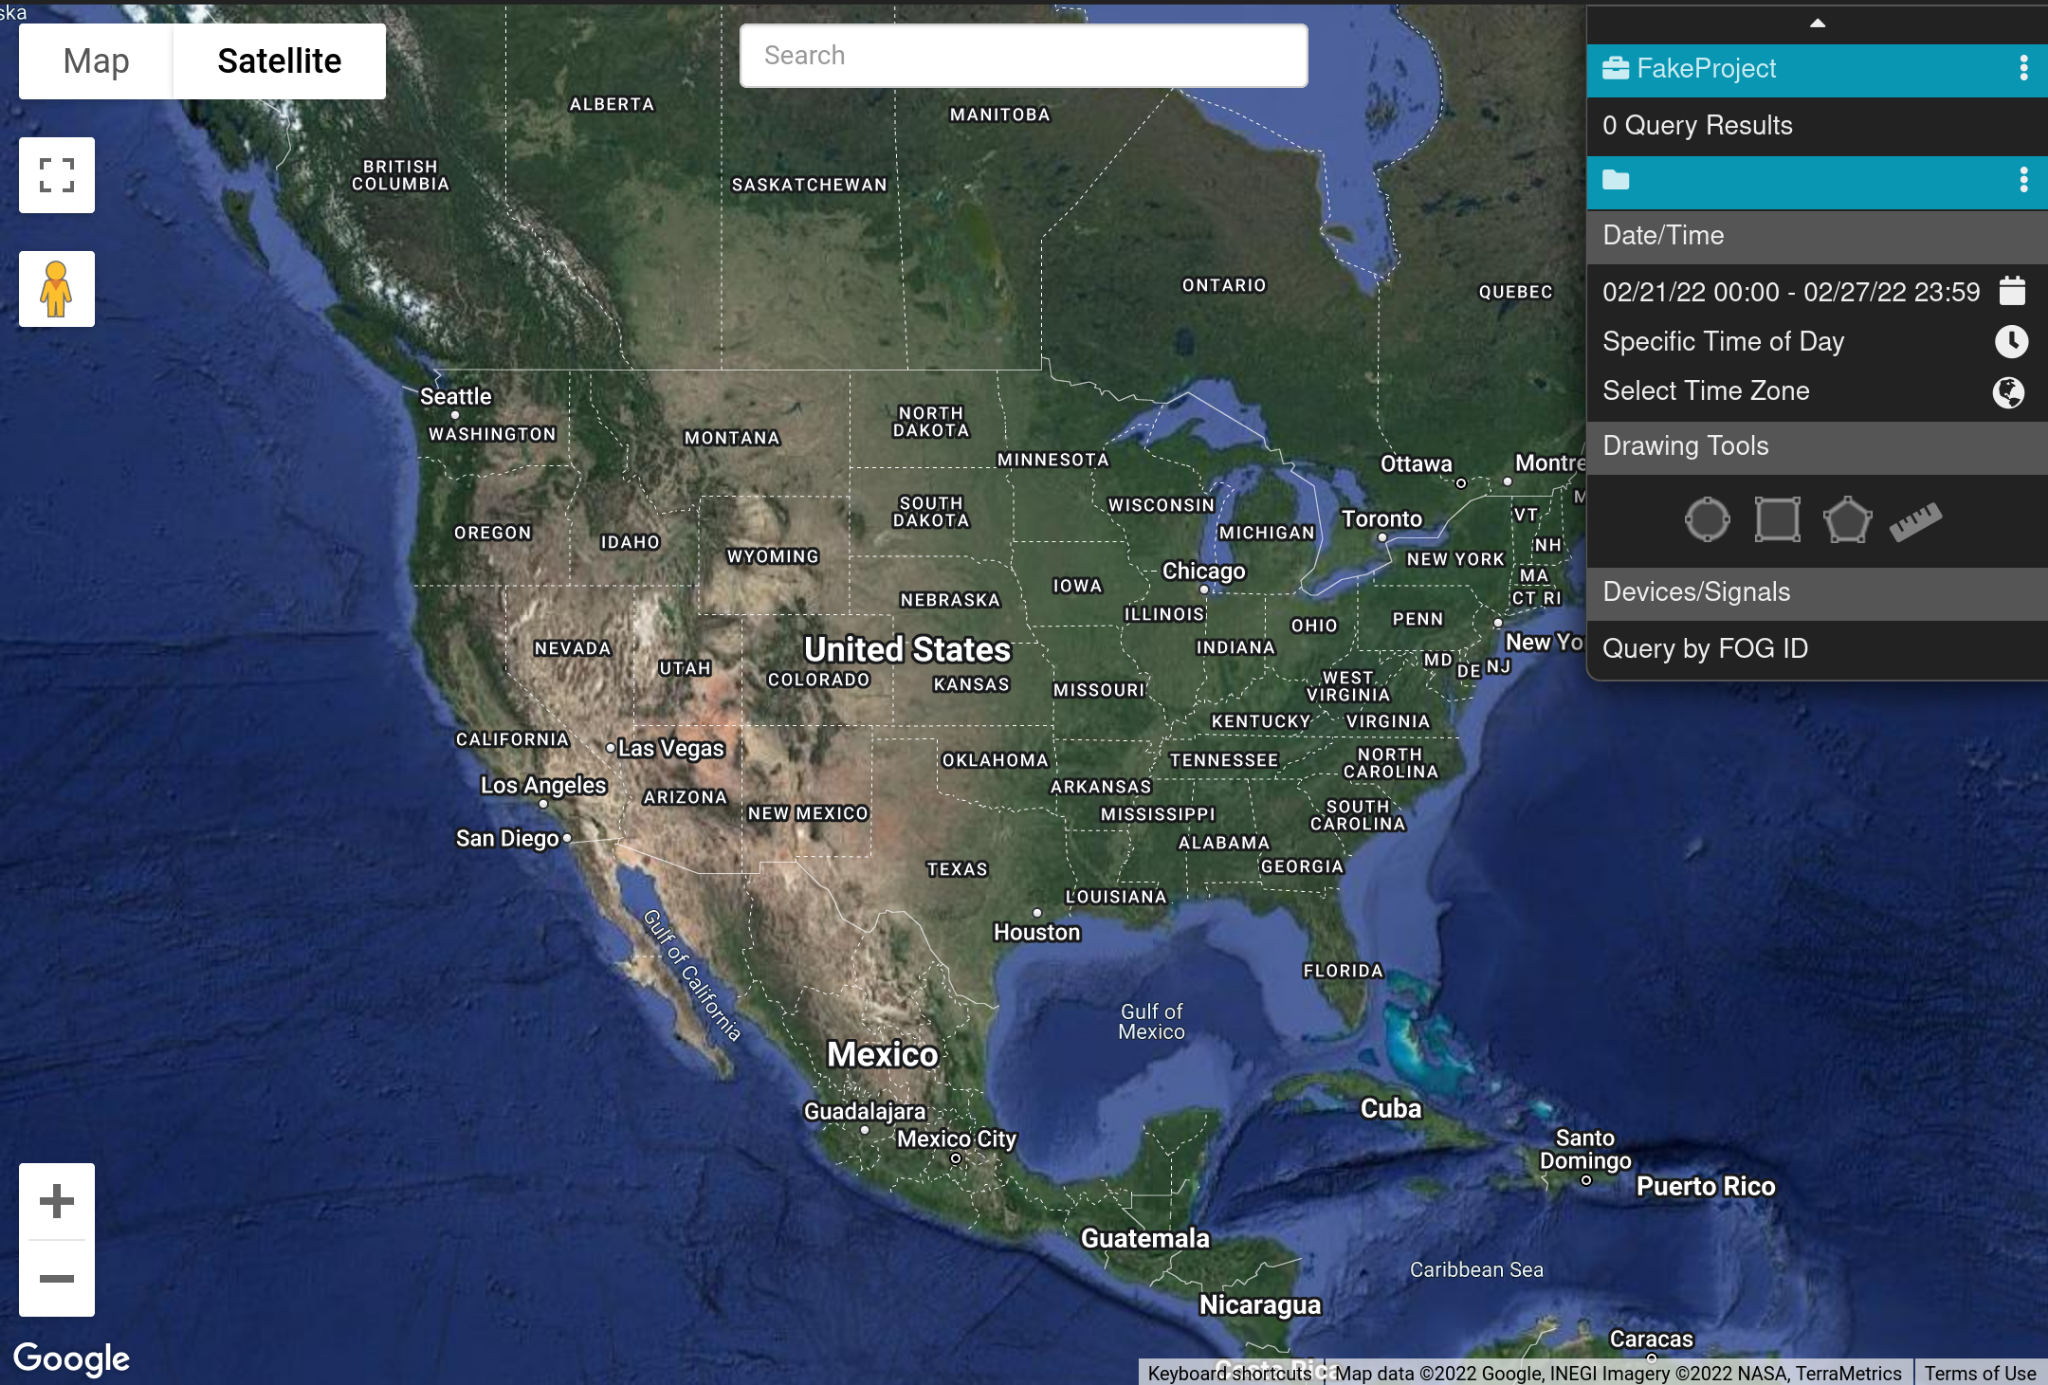 A screenshot of our facsimile of FOG Reveal. A Google Maps view of the United States is accompanied by multiple widgets for performing geofenced queries.